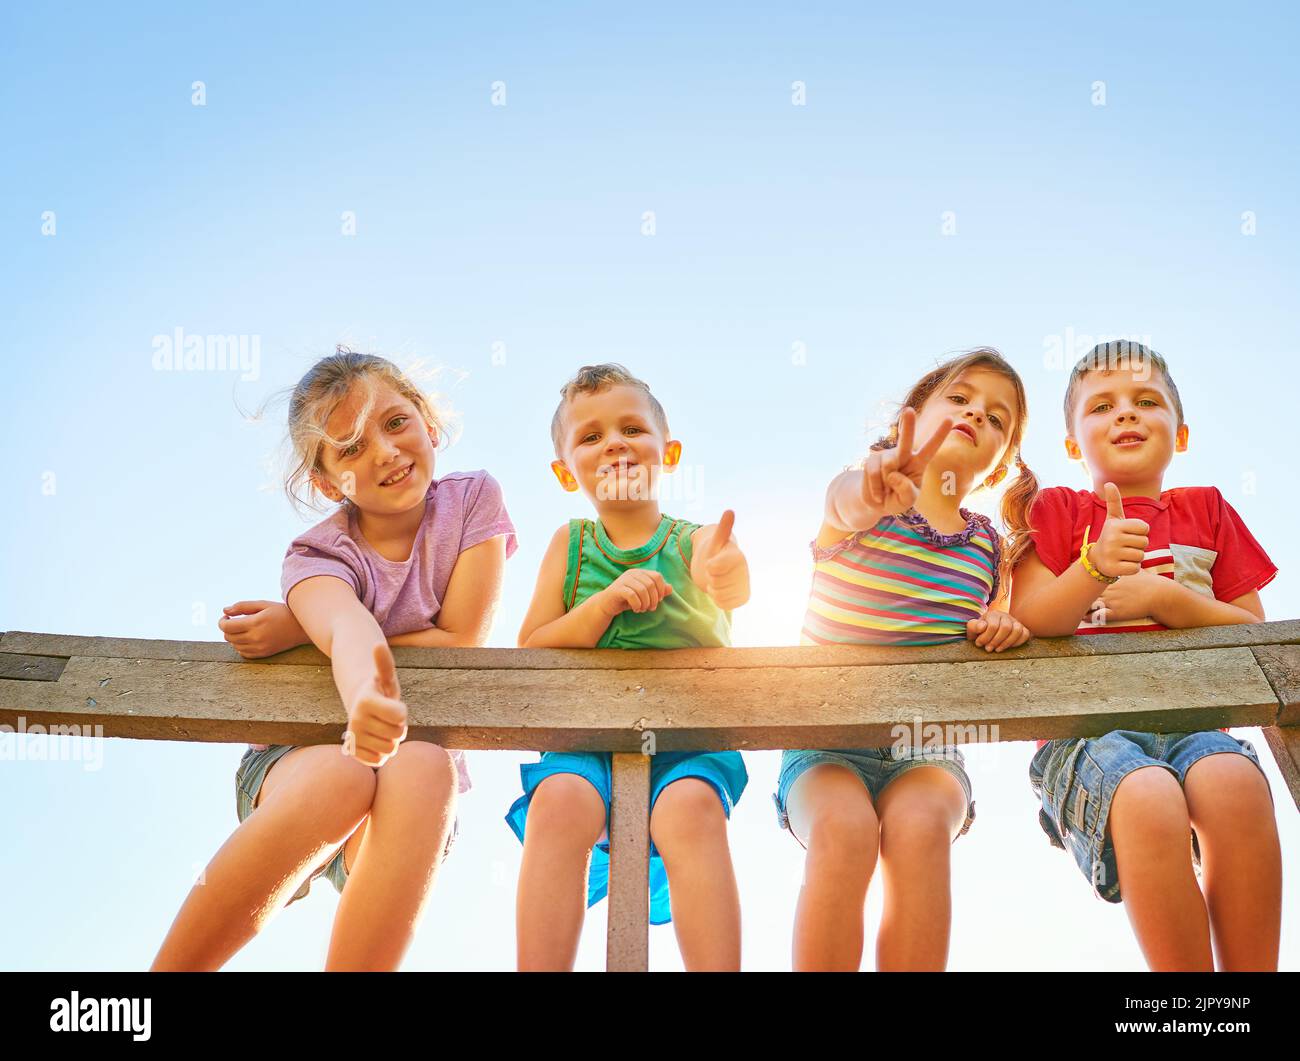 Thumbs up for some summer fun. Portrait of a group of little children showing thumbs up while playing together outdoors. Stock Photo